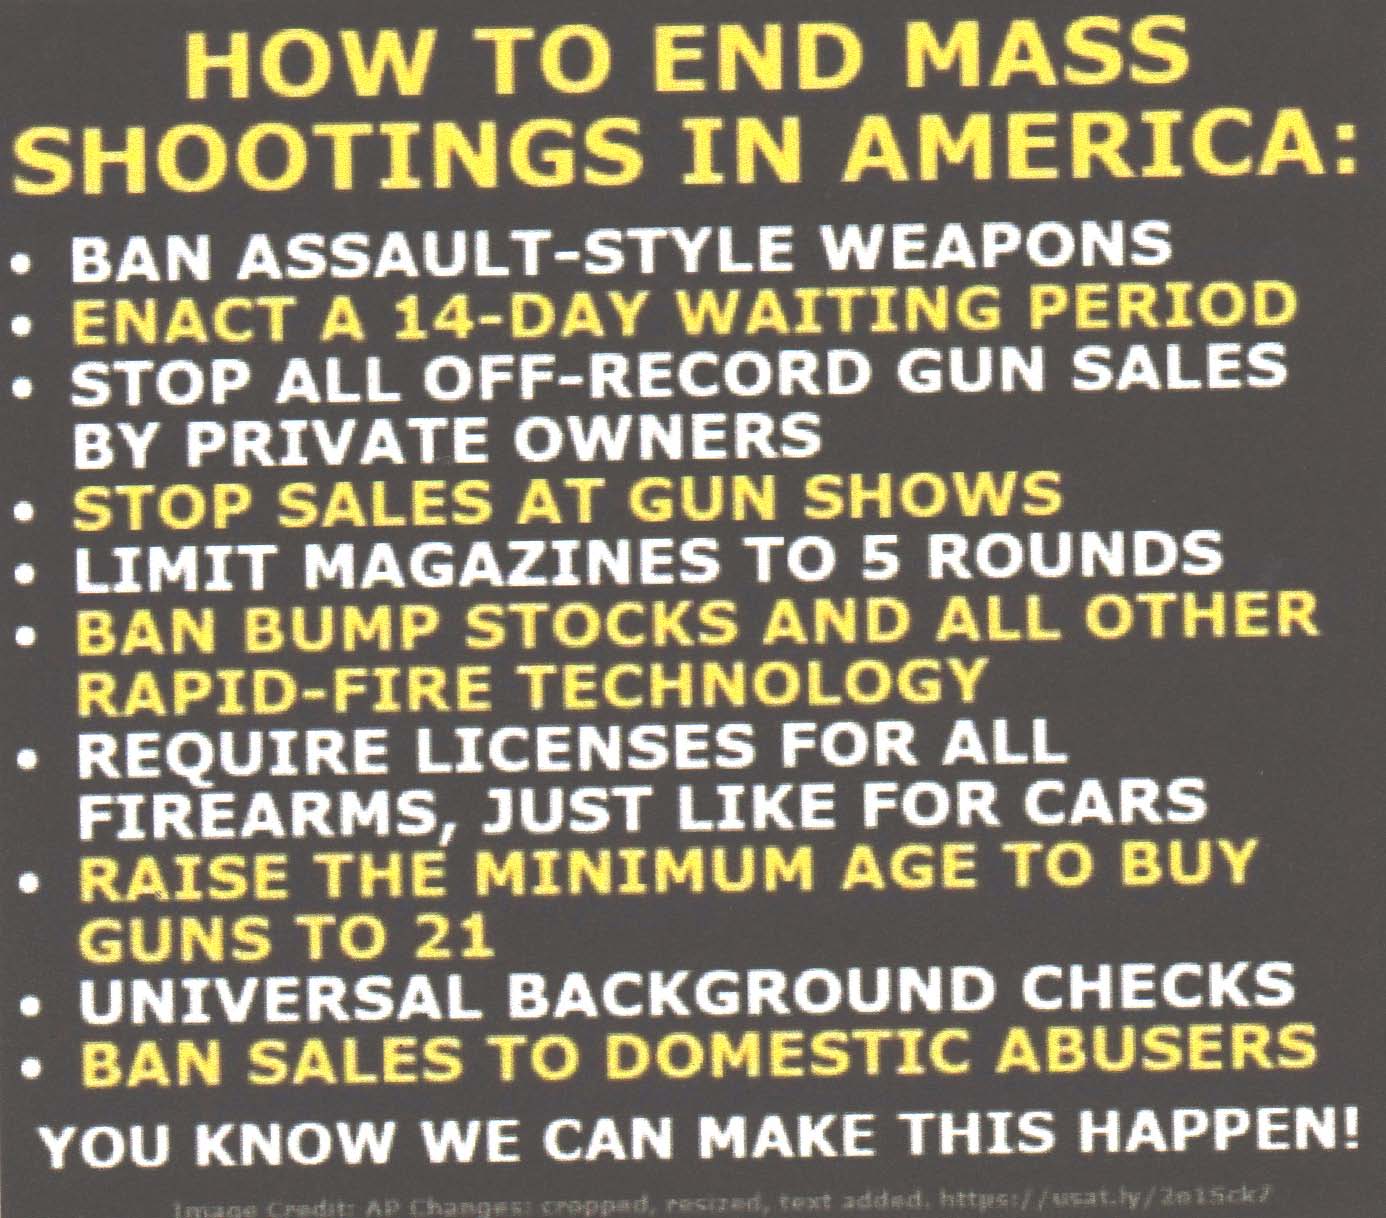 How to End Mass Shootings in USA